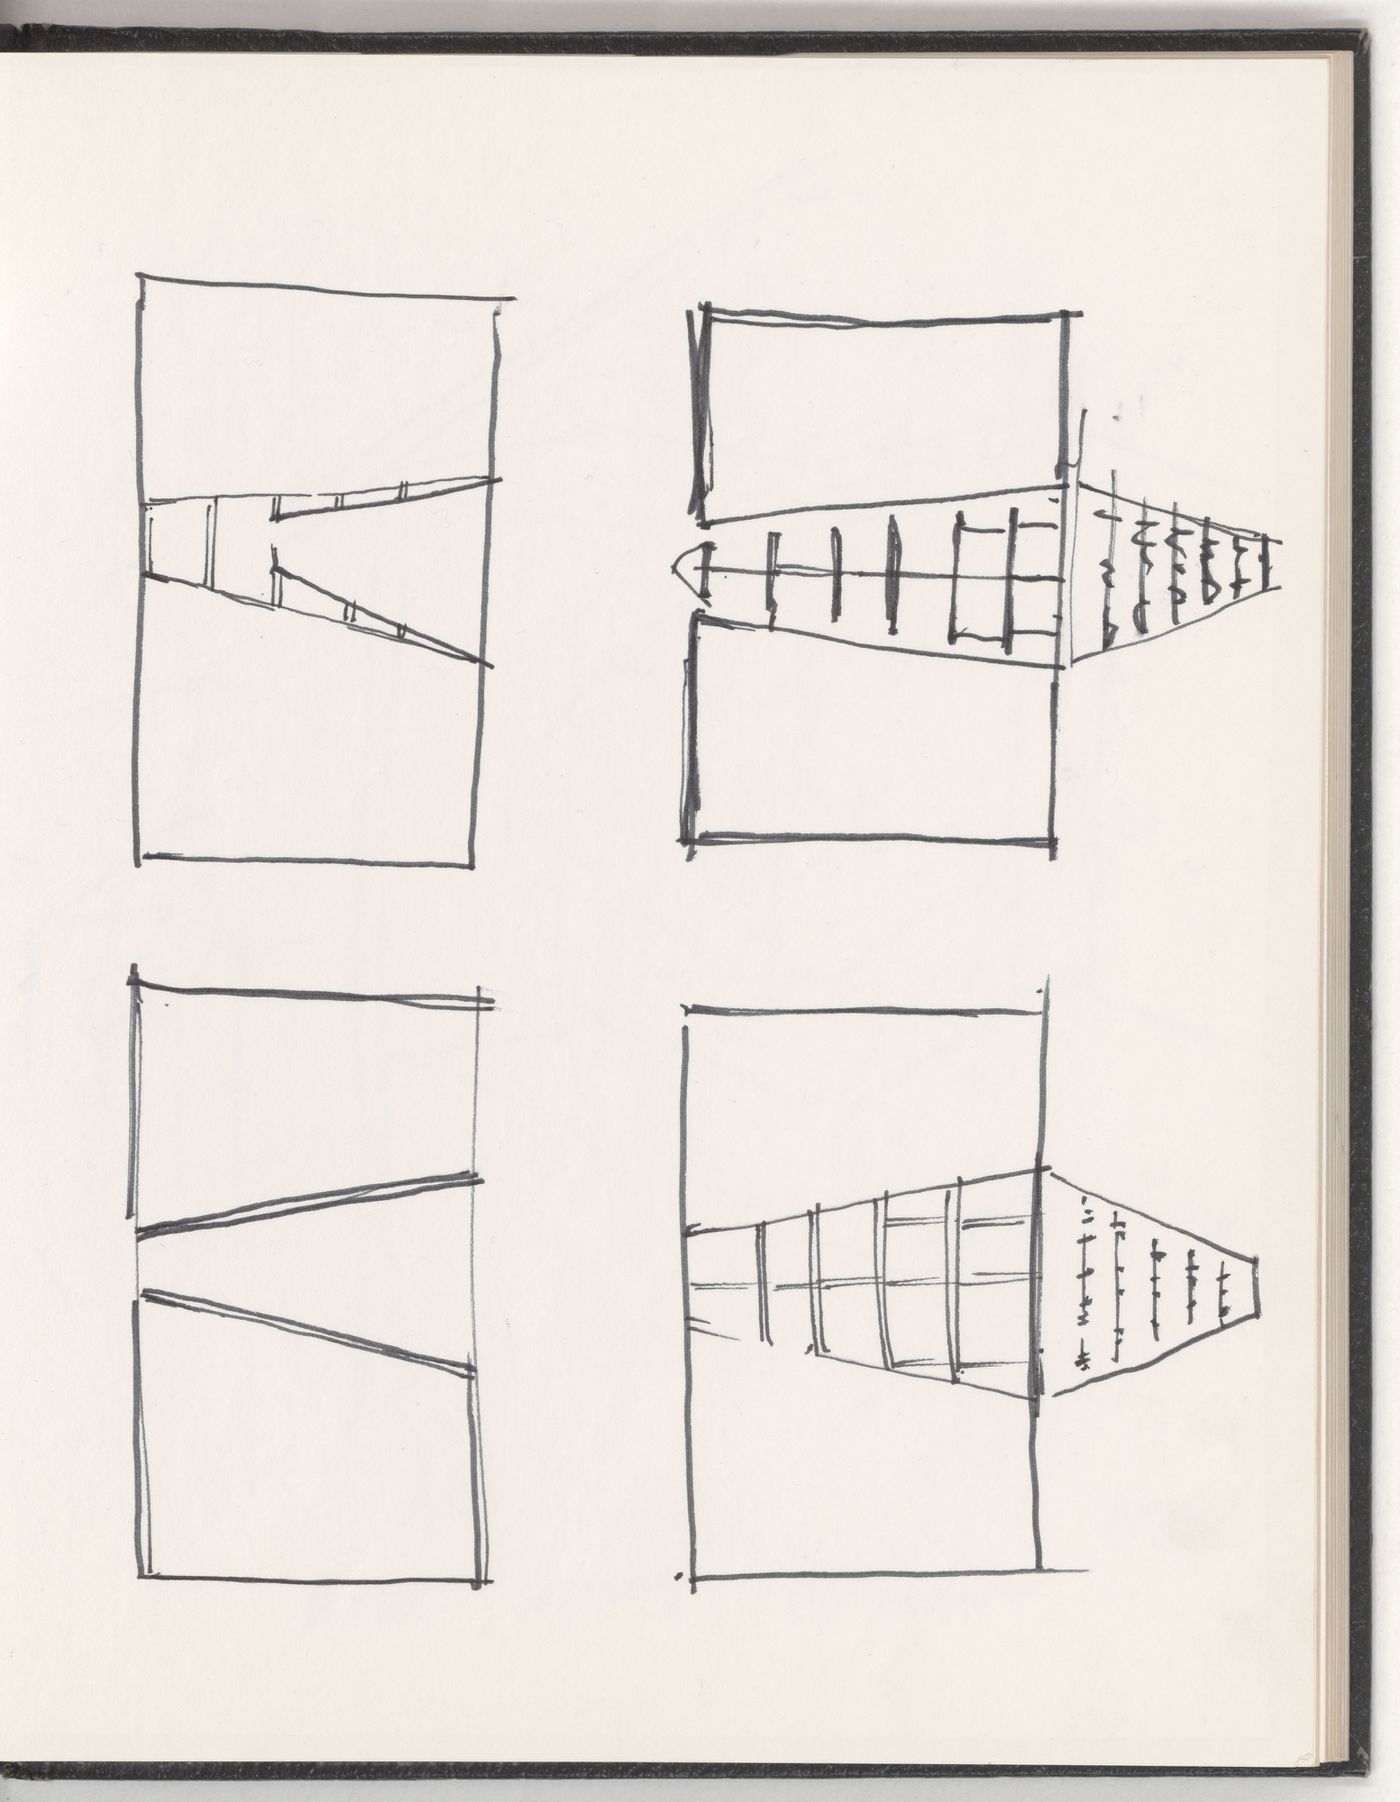 Sketches for architectural proposals